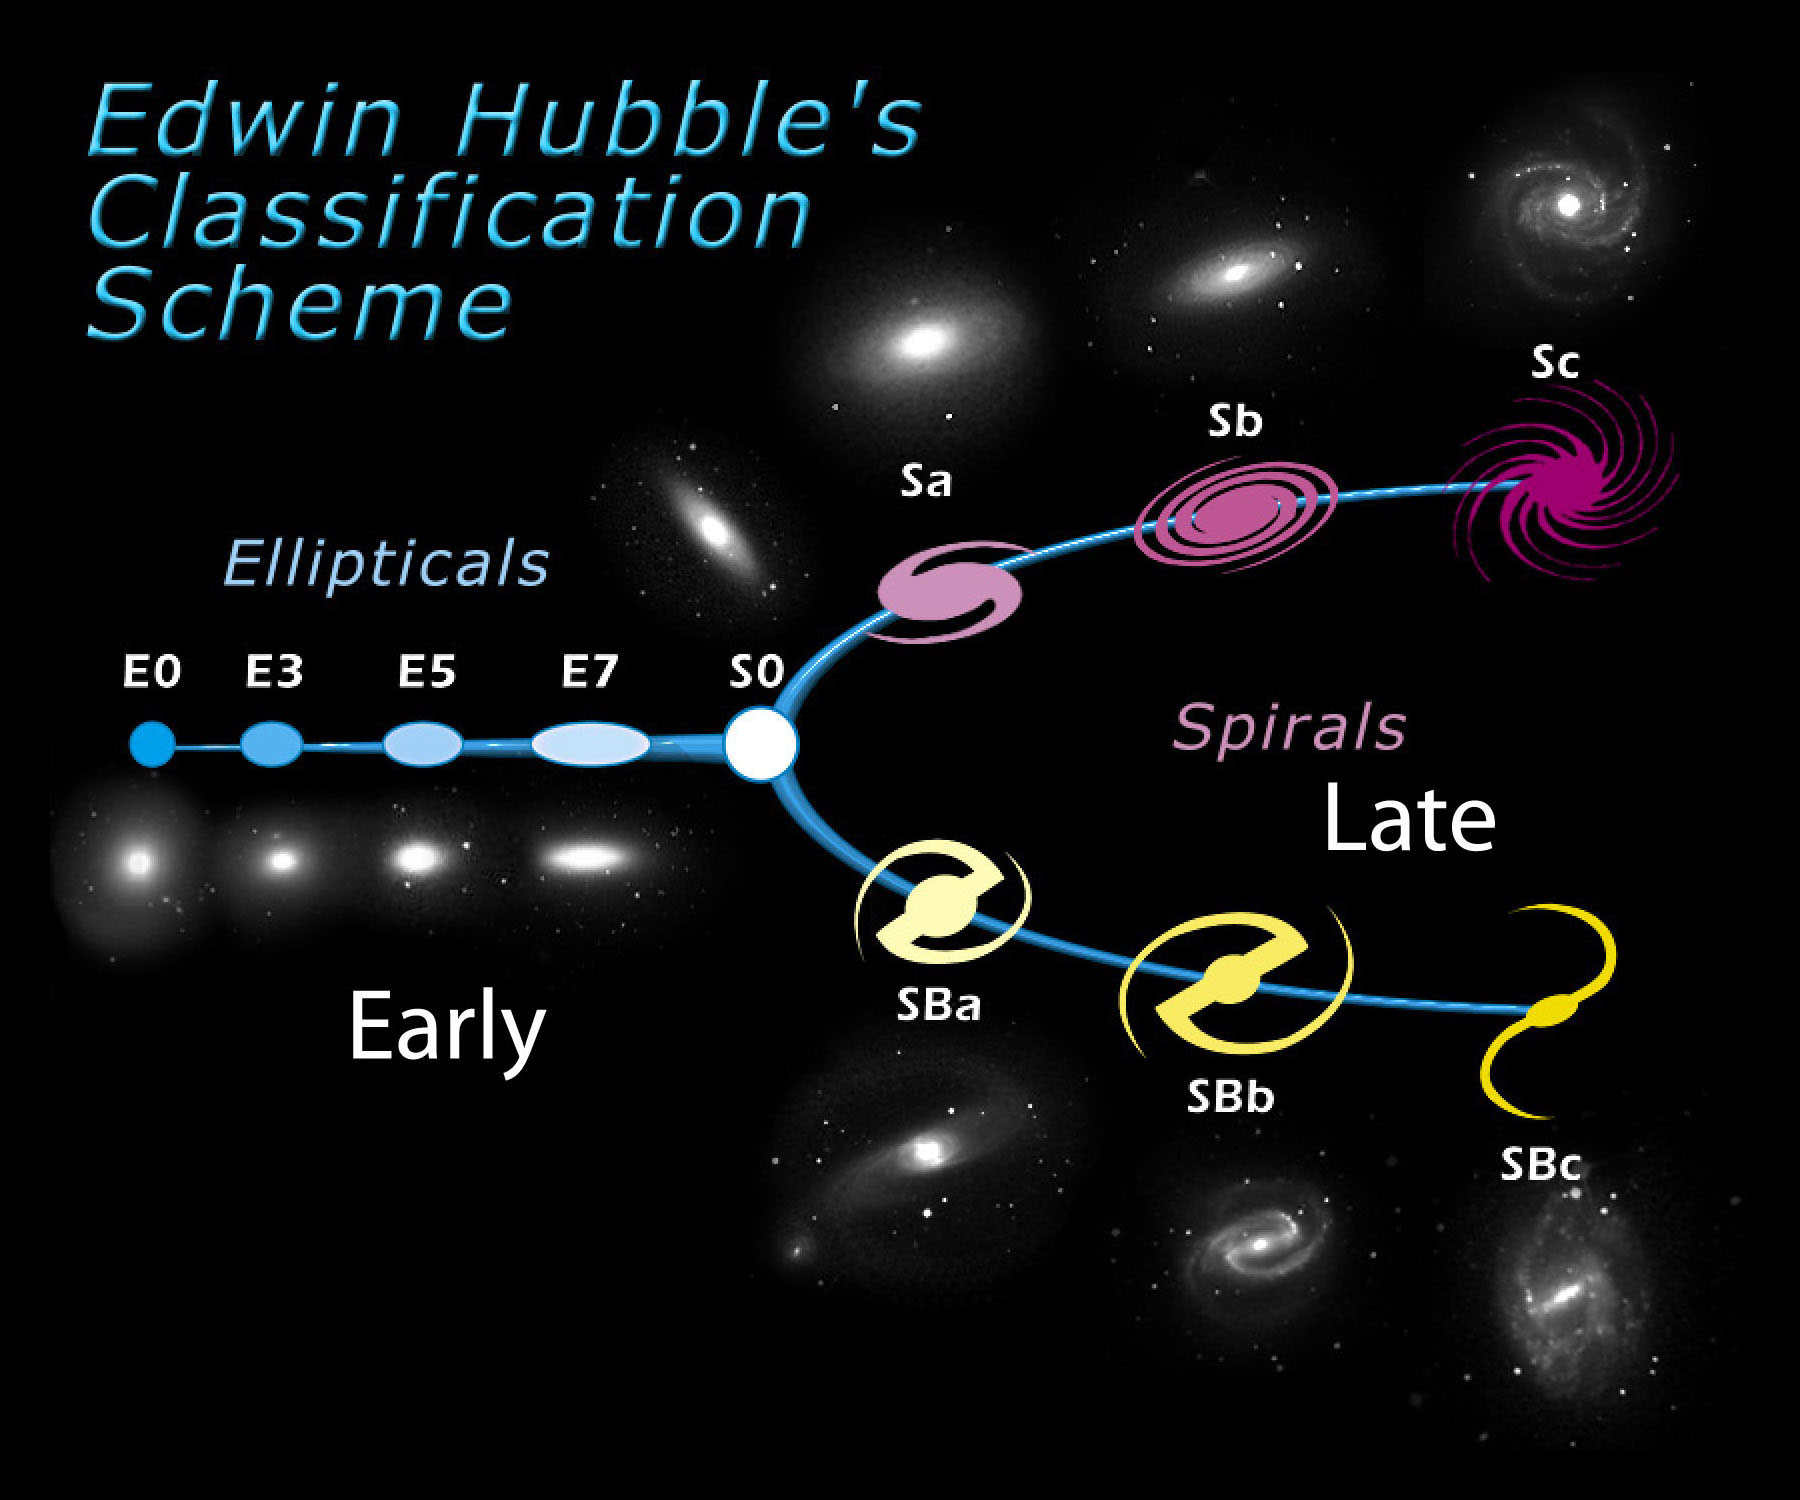 Image #3: Tuning the volunteers in via Hubble’s classification of galaxies. Credit: STScI